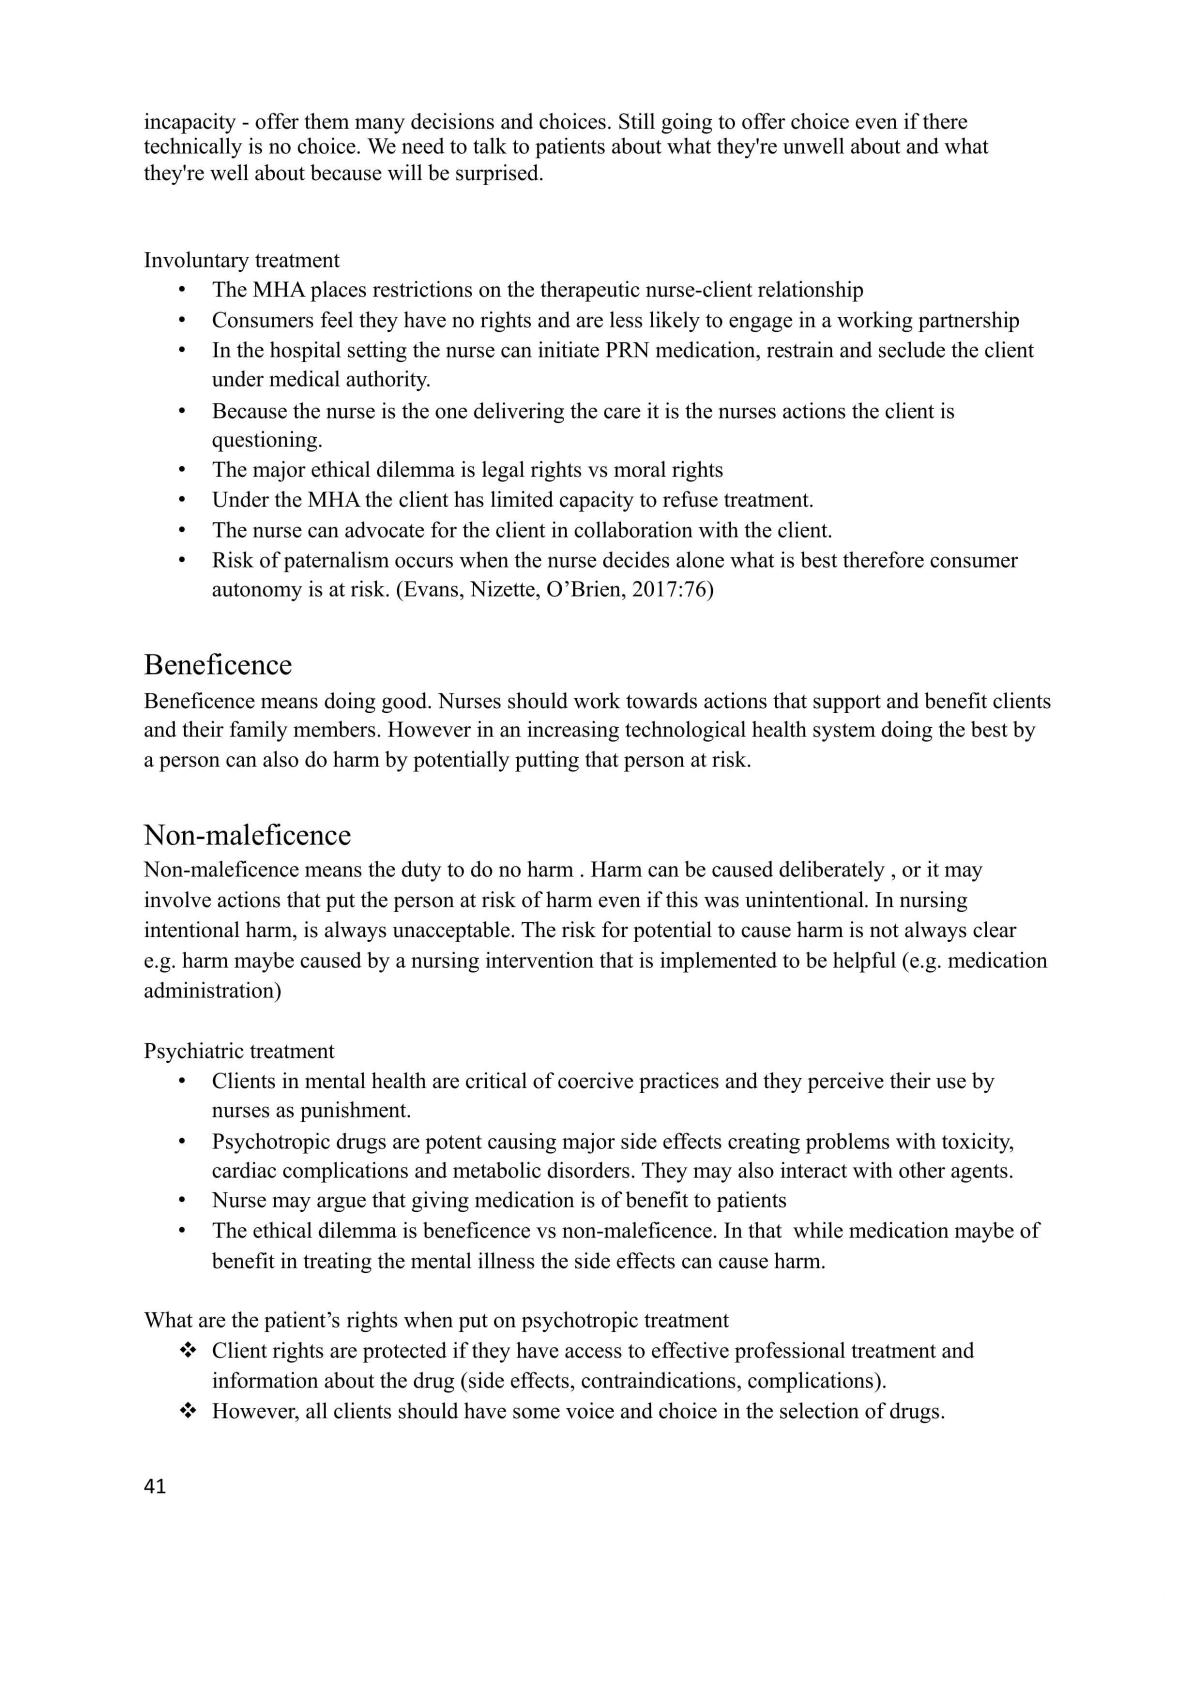 Study Notes for NURS603 - Page 41